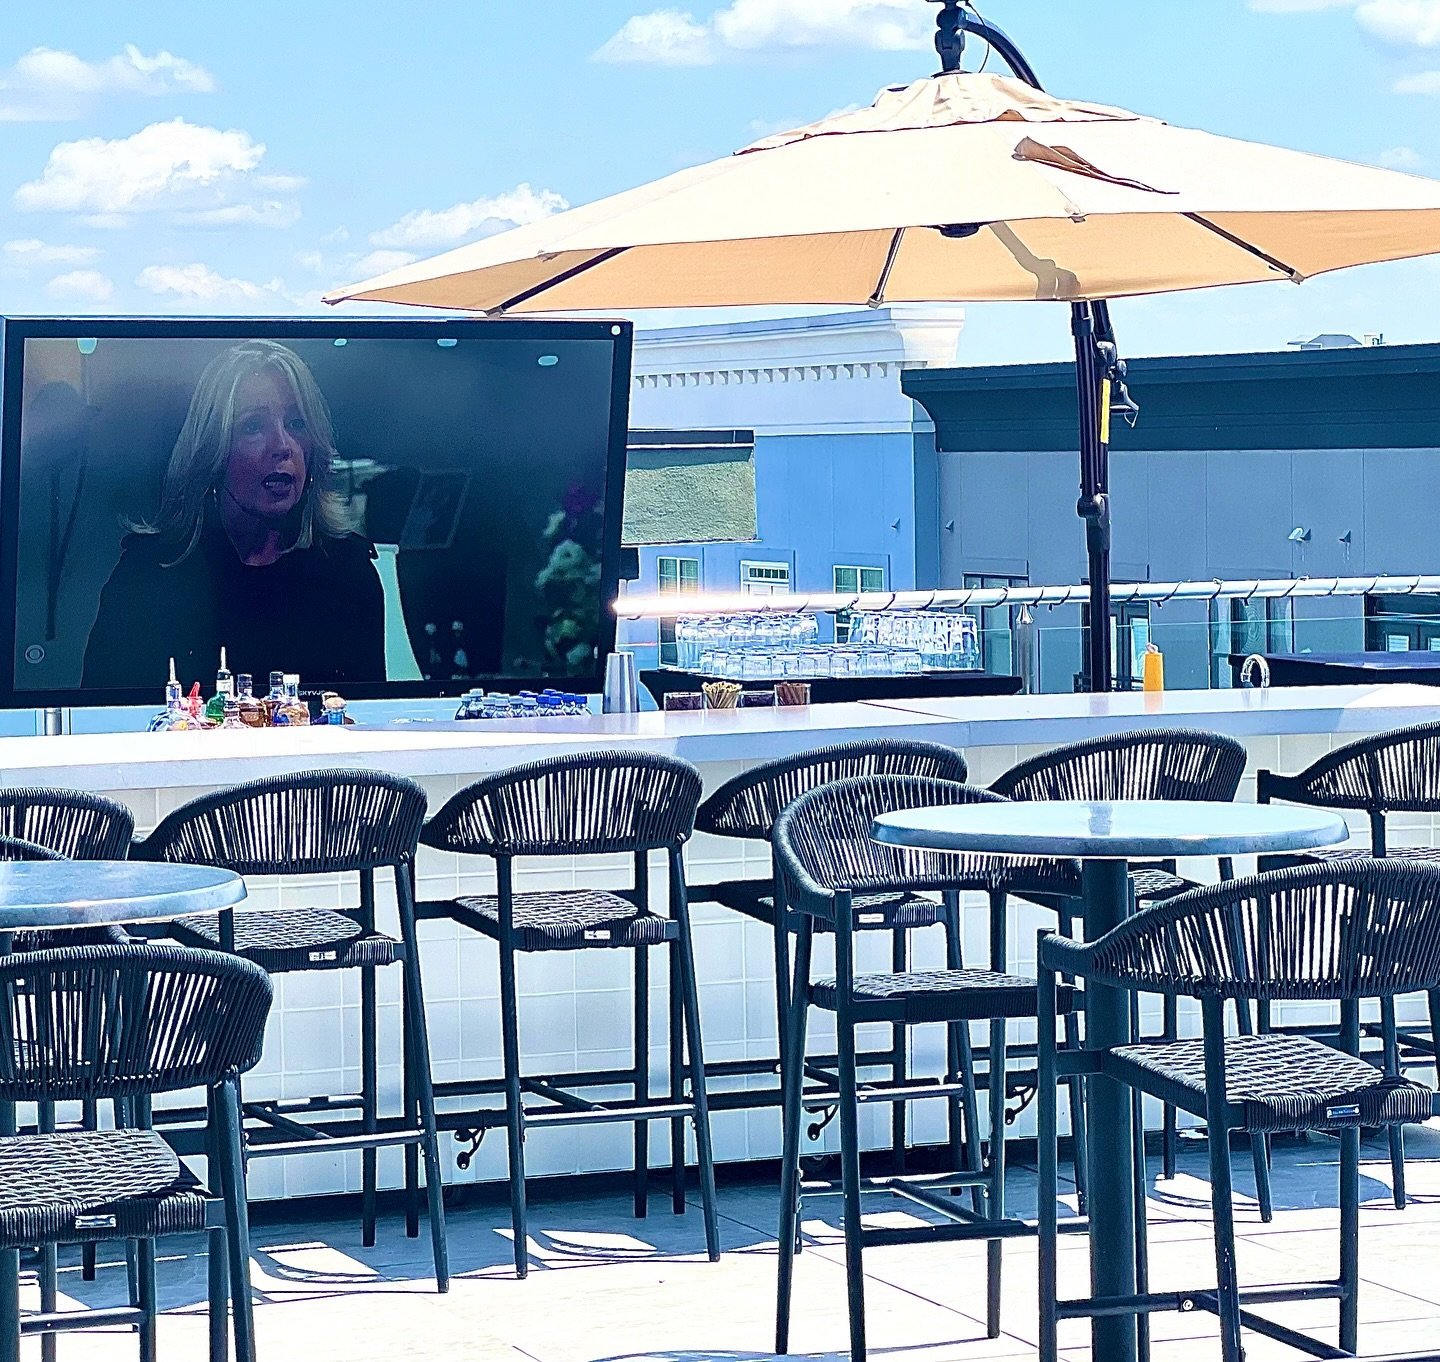 THE PATIO BAR IS NOW OPEN 🥂

And it&rsquo;s going to be a beautiful weekend!! Come up and visit us on the 7th floor of the @achotelraleigh 

Today:
2pm-11pm

Friday:
6:30am-10am
2pm-12am

Saturday:
7am-11am
2pm-12am

Sunday:
7am-11am
12pm-9pm

#leve